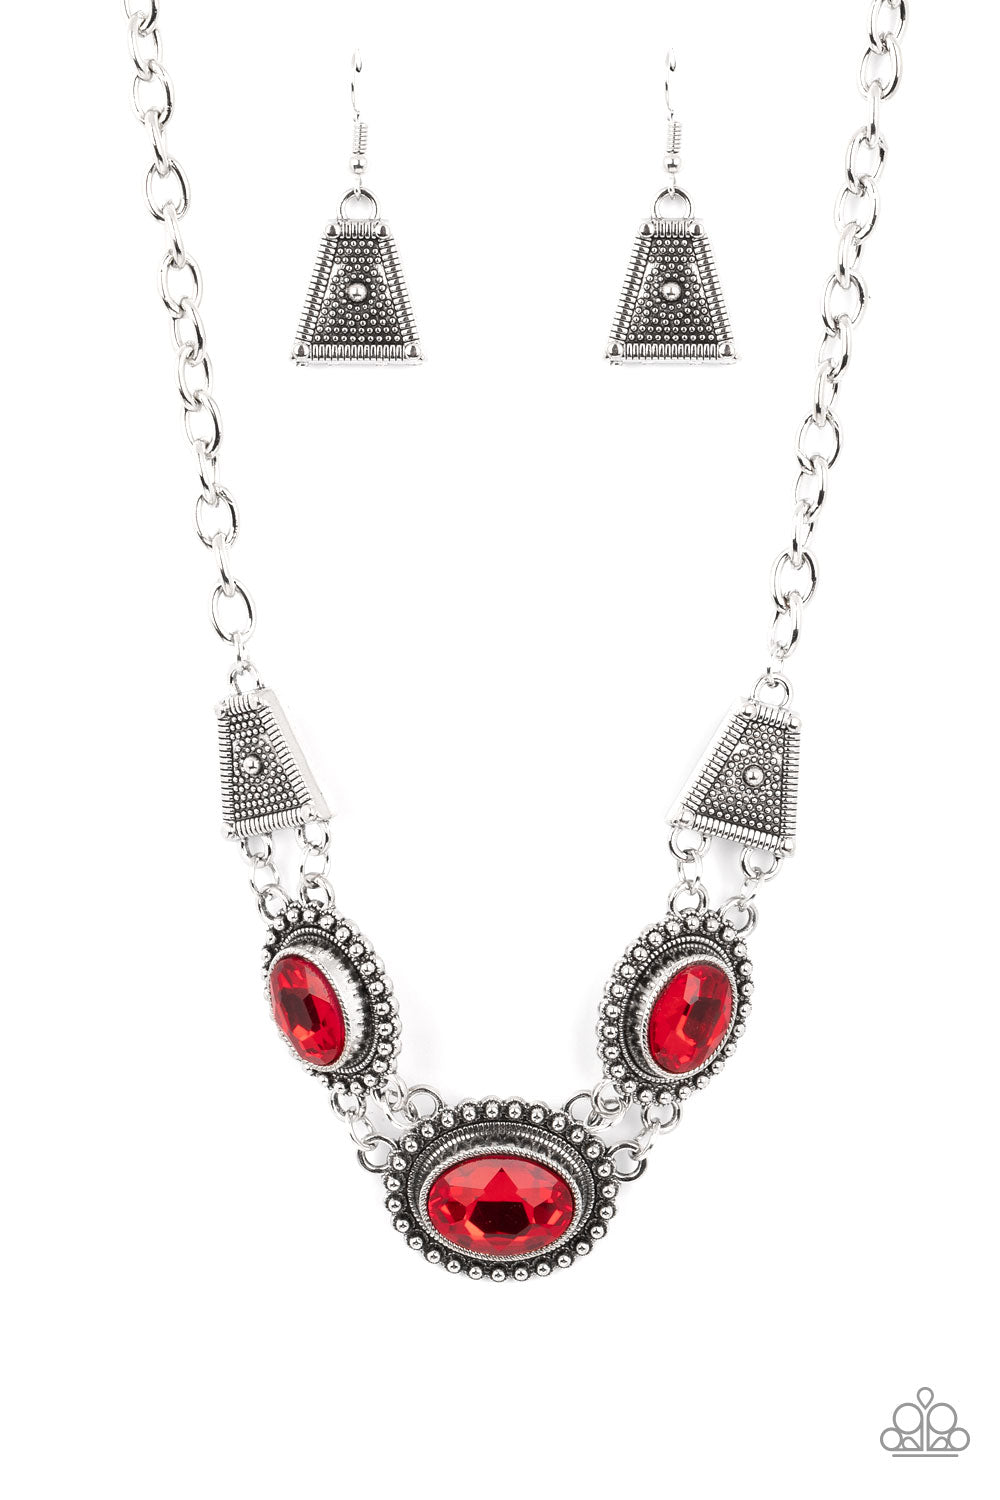 Paparazzi Necklaces - Textured Trapezoid - Red